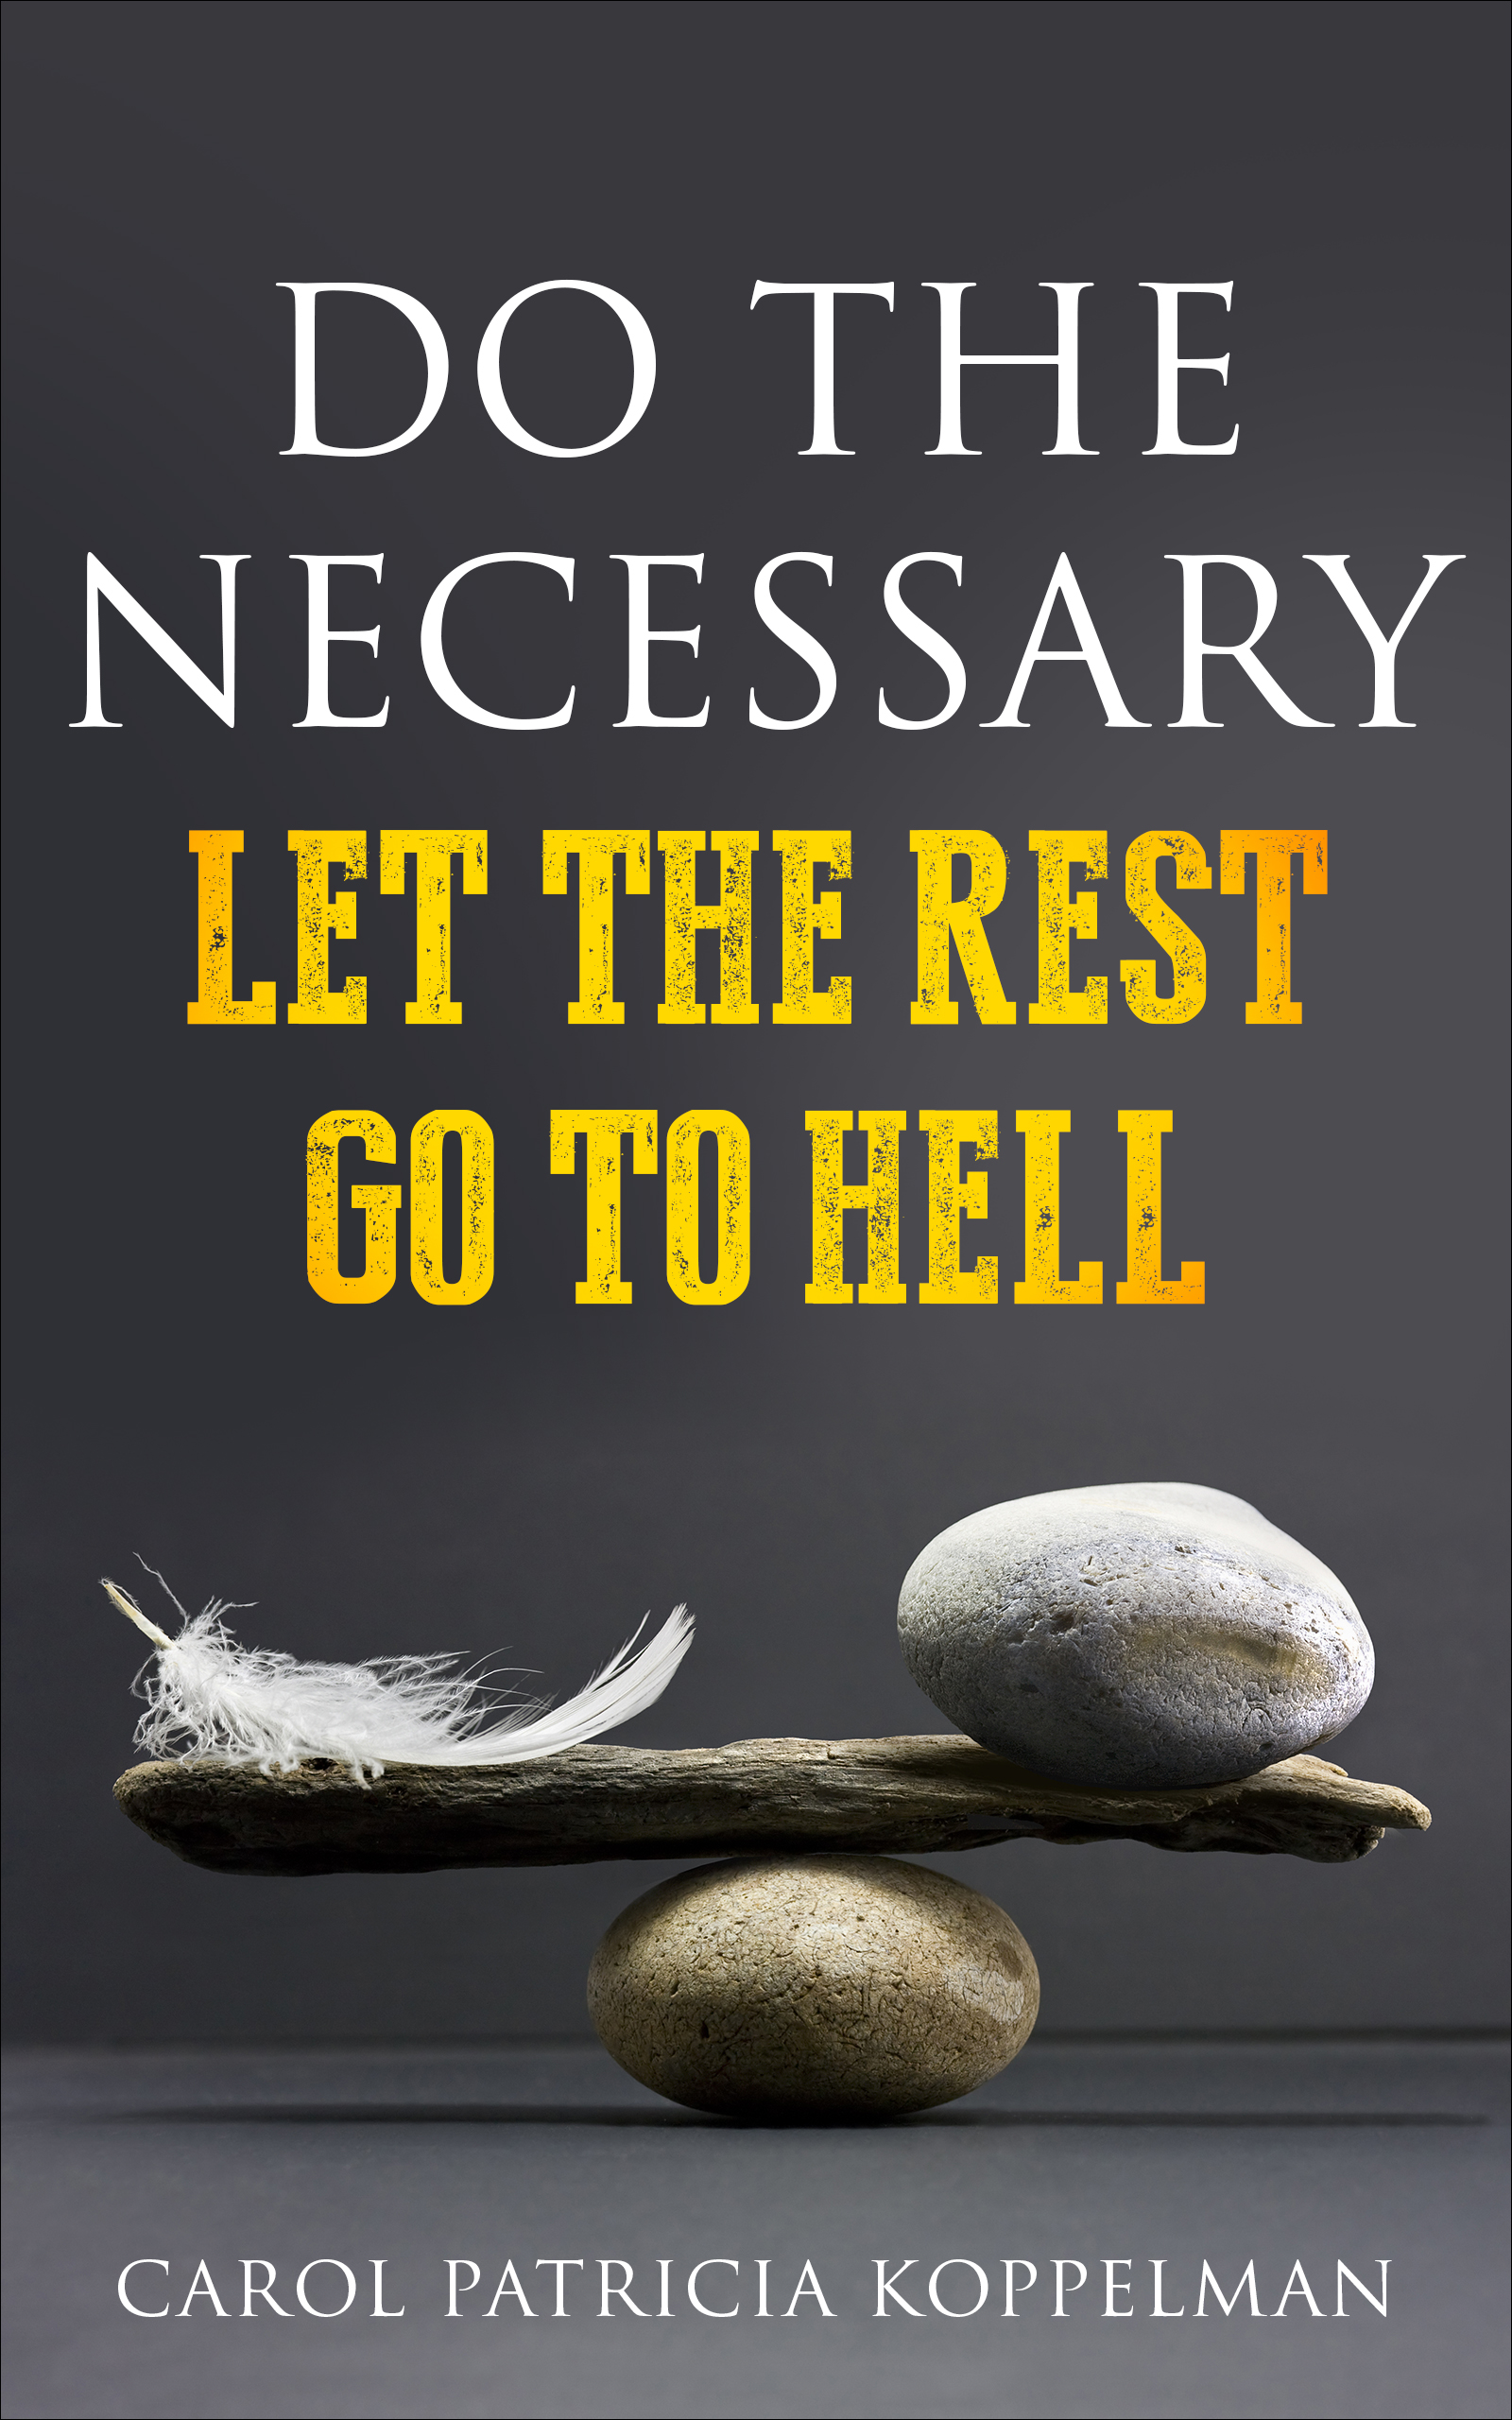 Do The Necessary - Let the Rest Go To Hell by Carol Patricia Koppelman